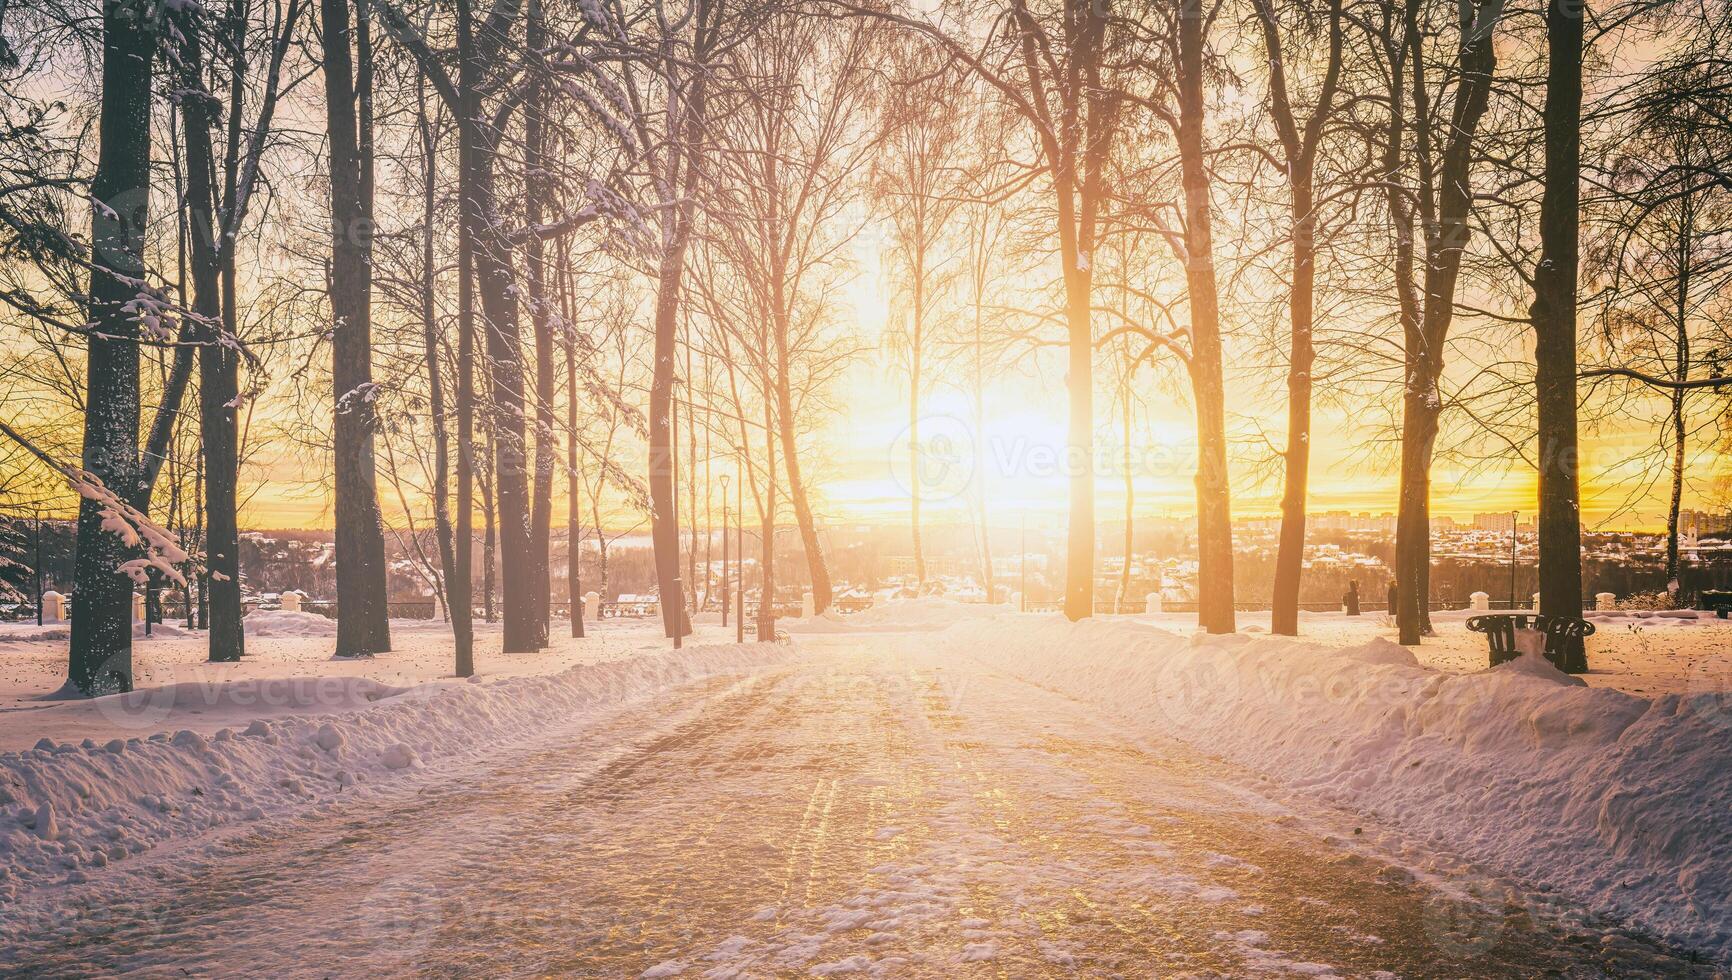 Sunset or dawn in a winter city park with trees, benches and sidewalks covered with snow and ice. Vintage film aesthetic. photo